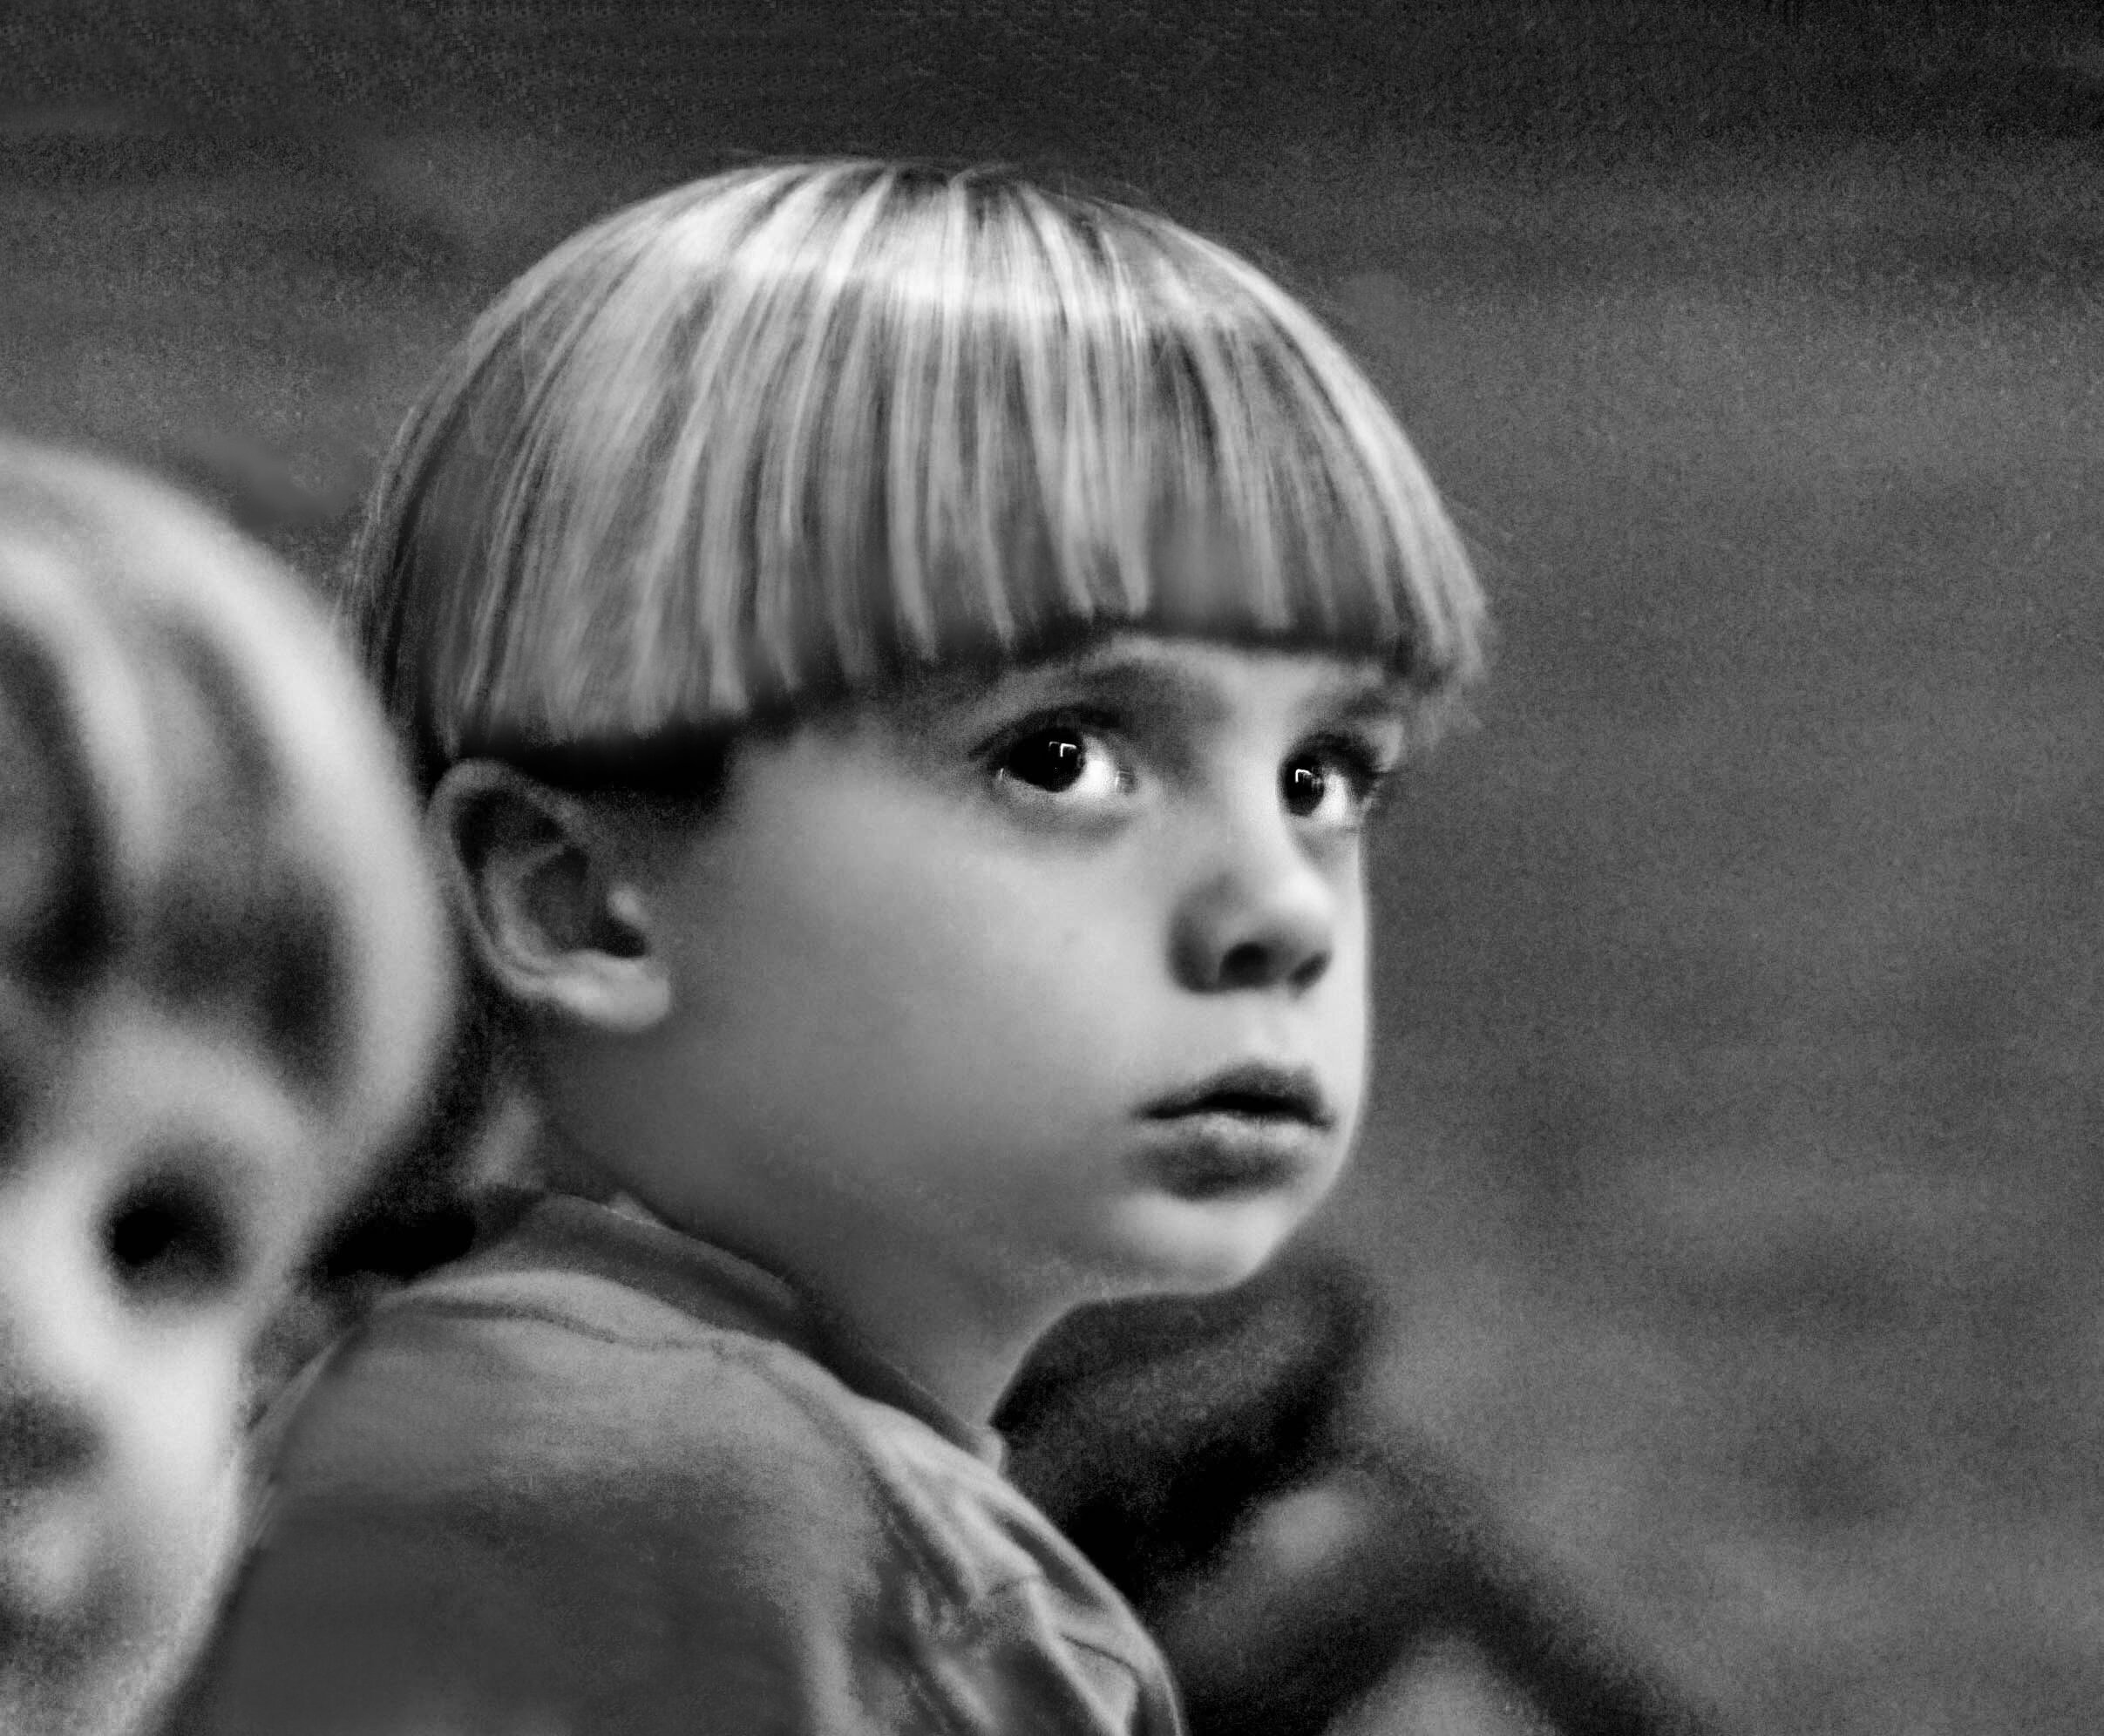 A boy watches on the sidelines-b&w.jpg